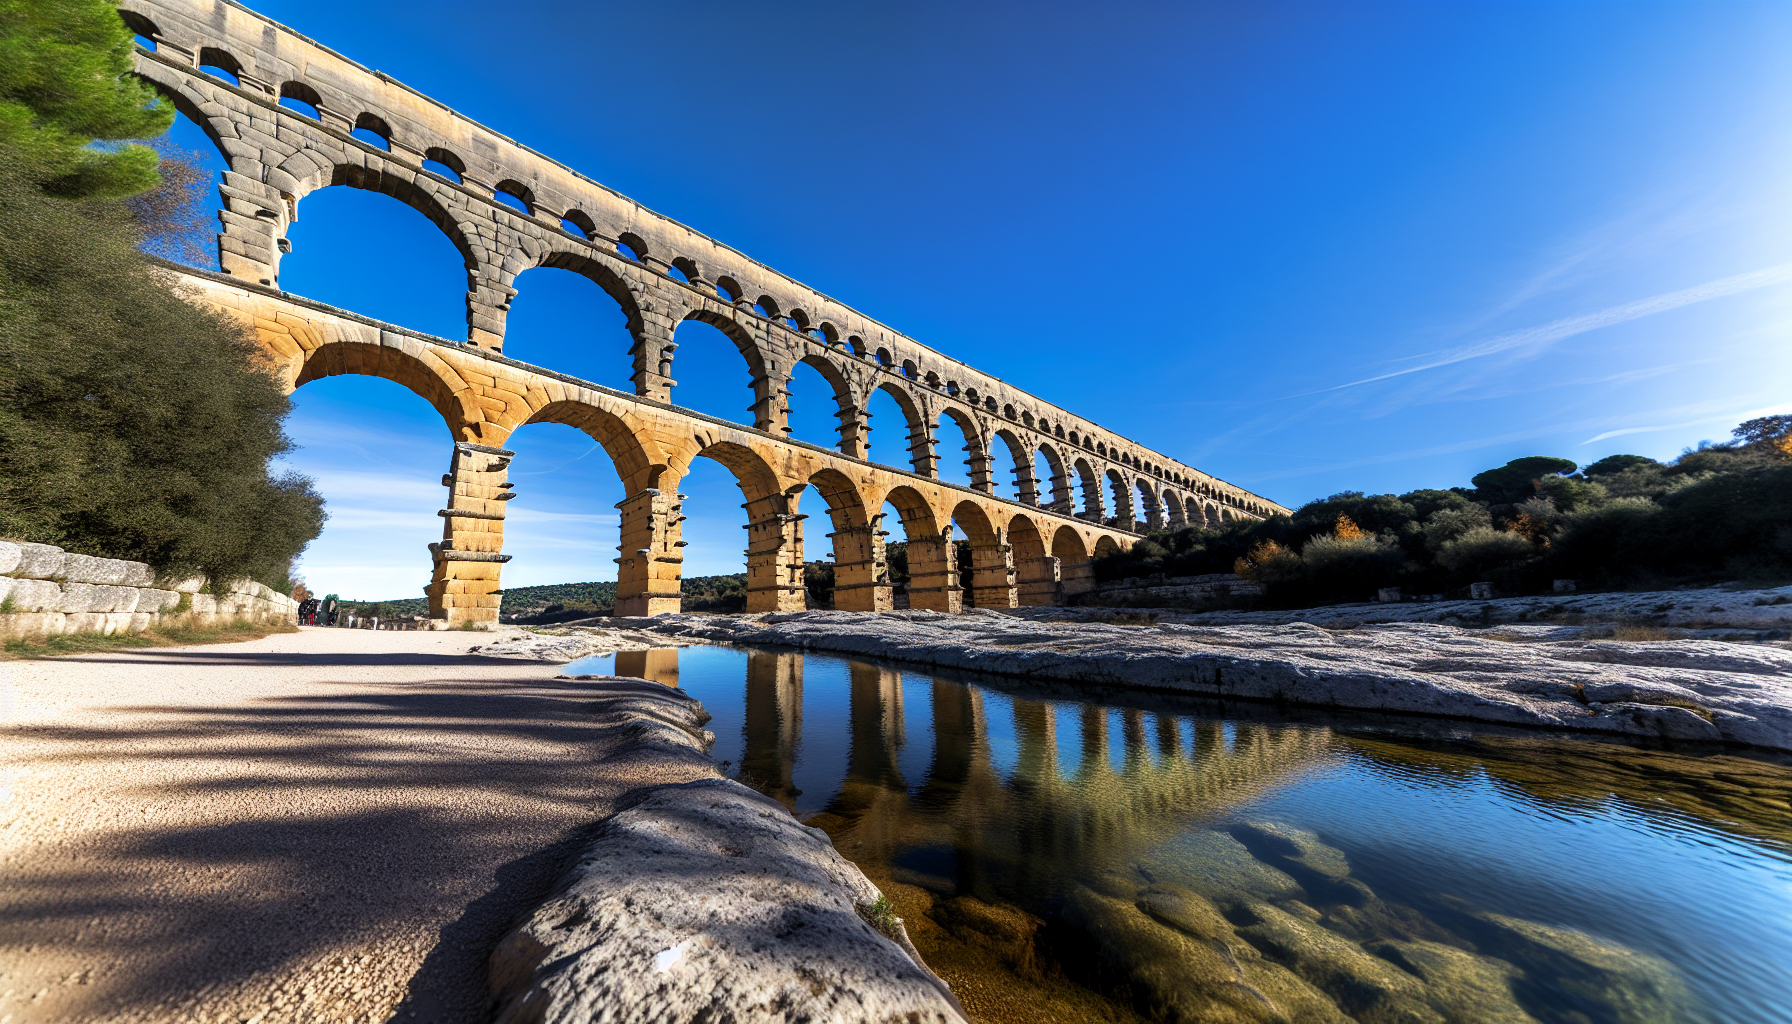 Photo of the Pont du Gard aqueduct in Southern France